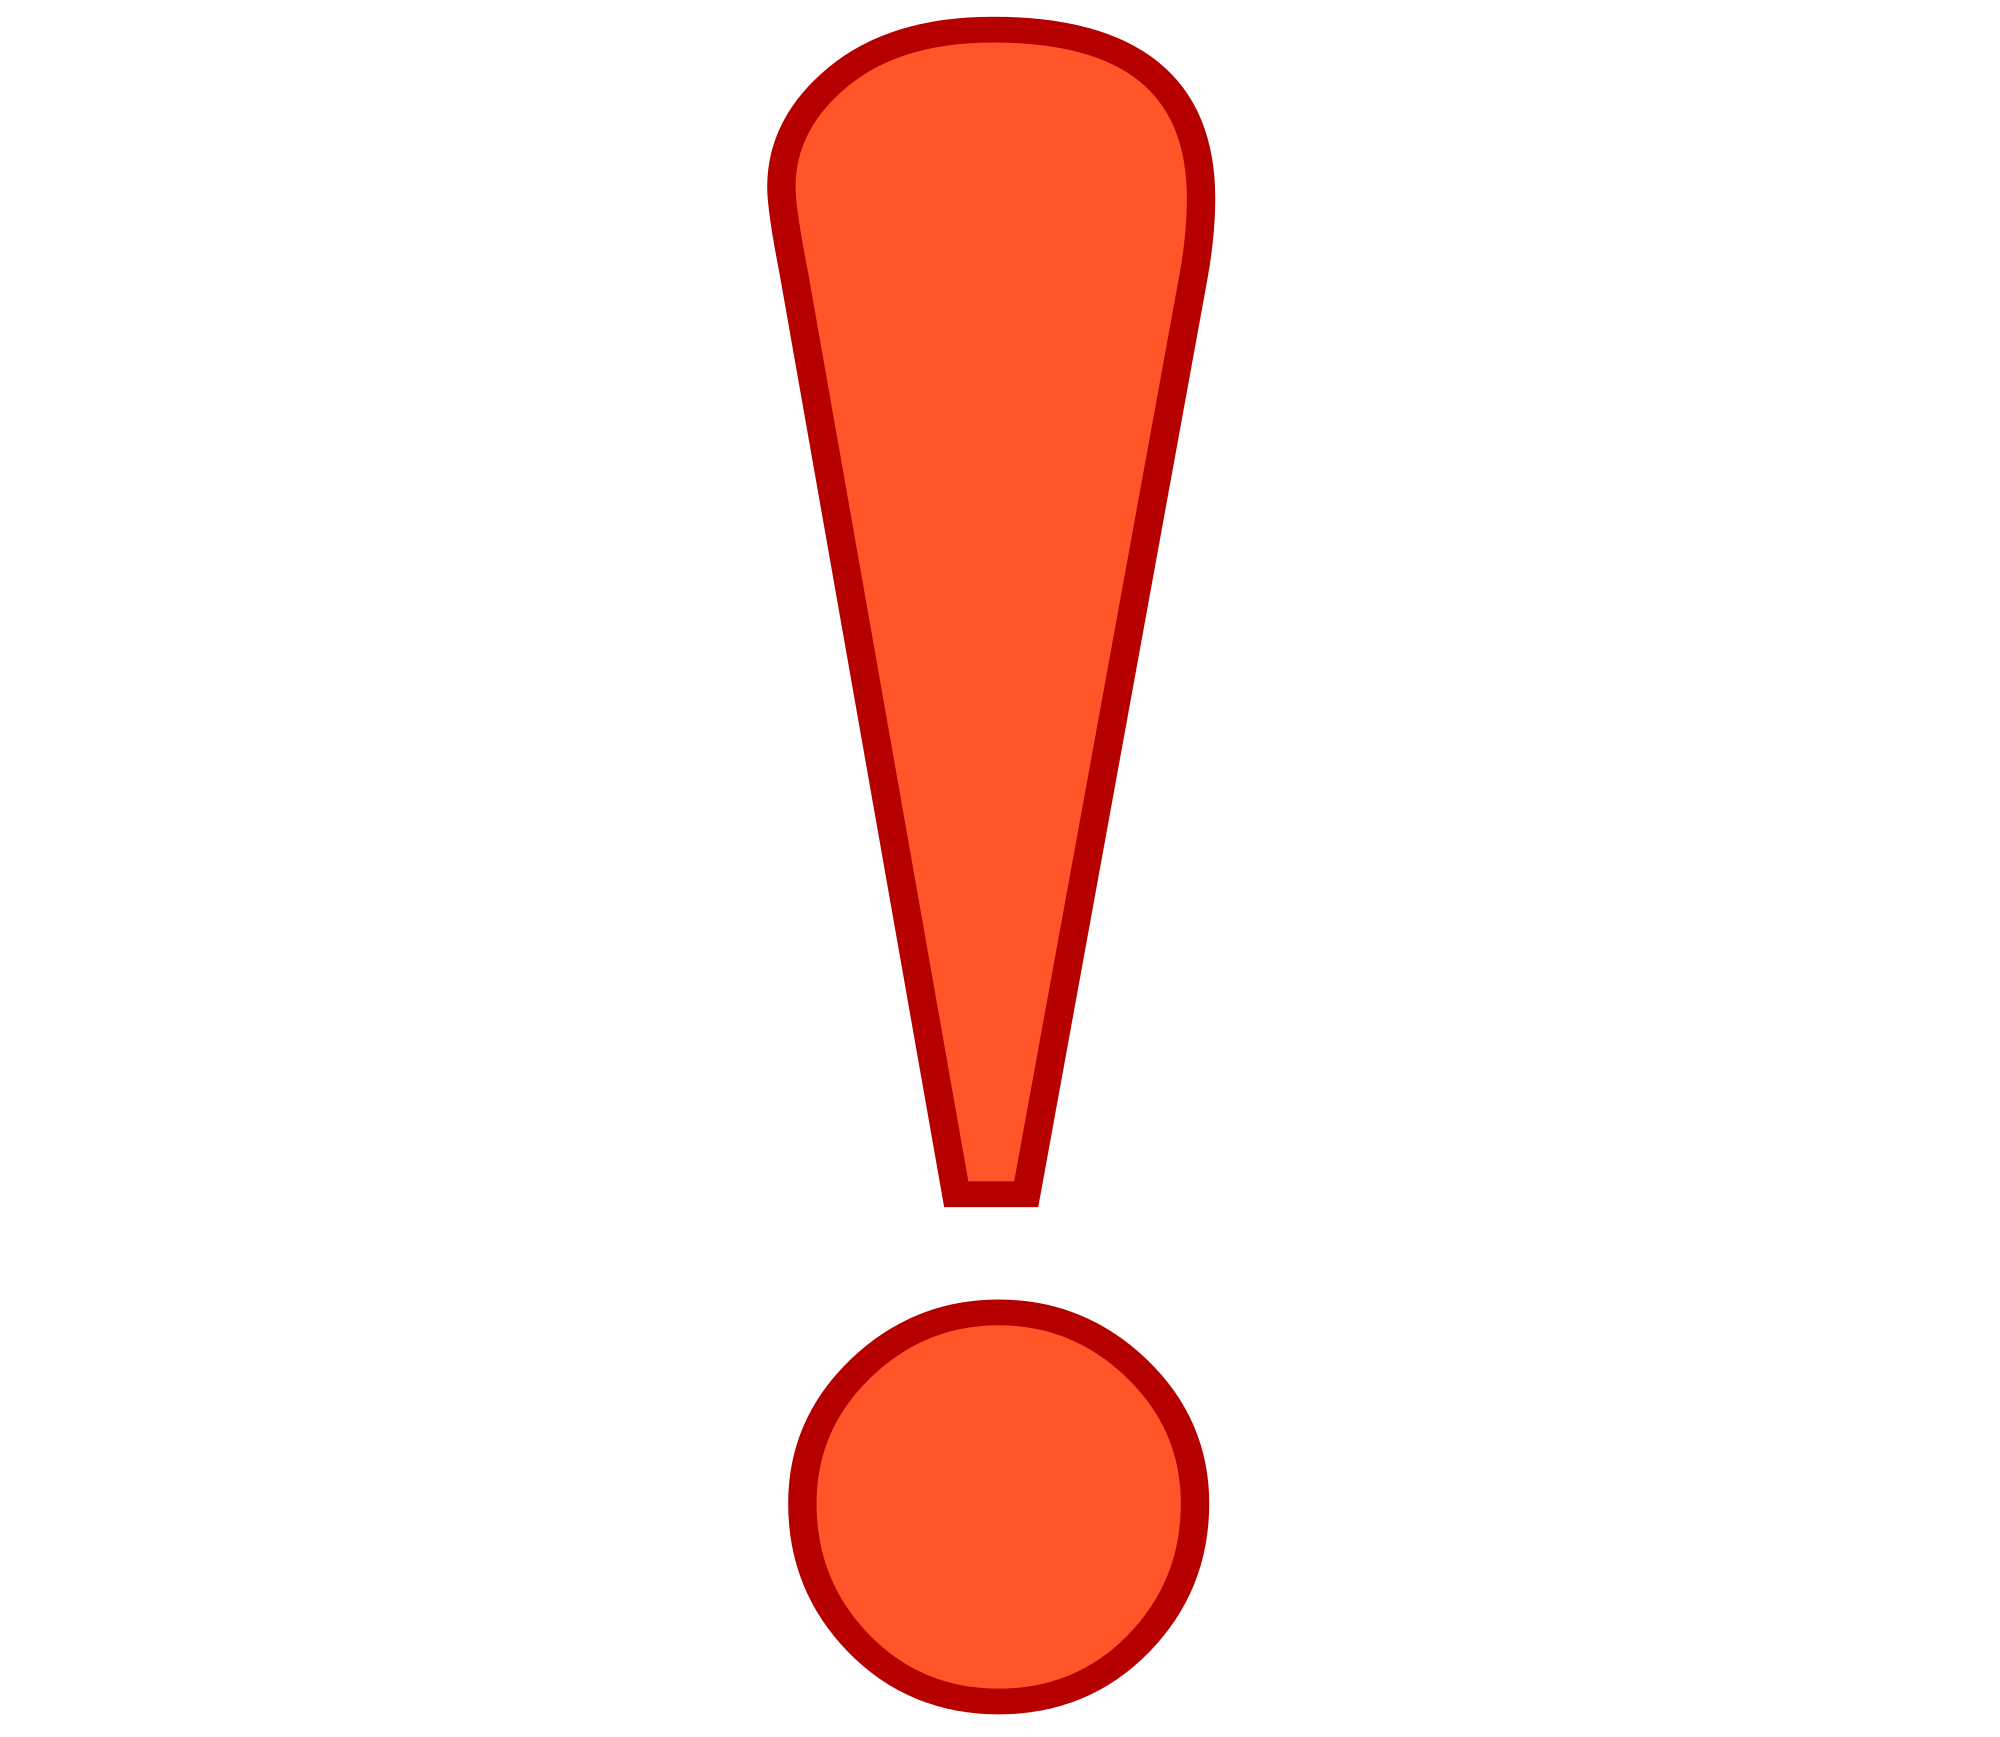 Exclamation Mark Transparent Image